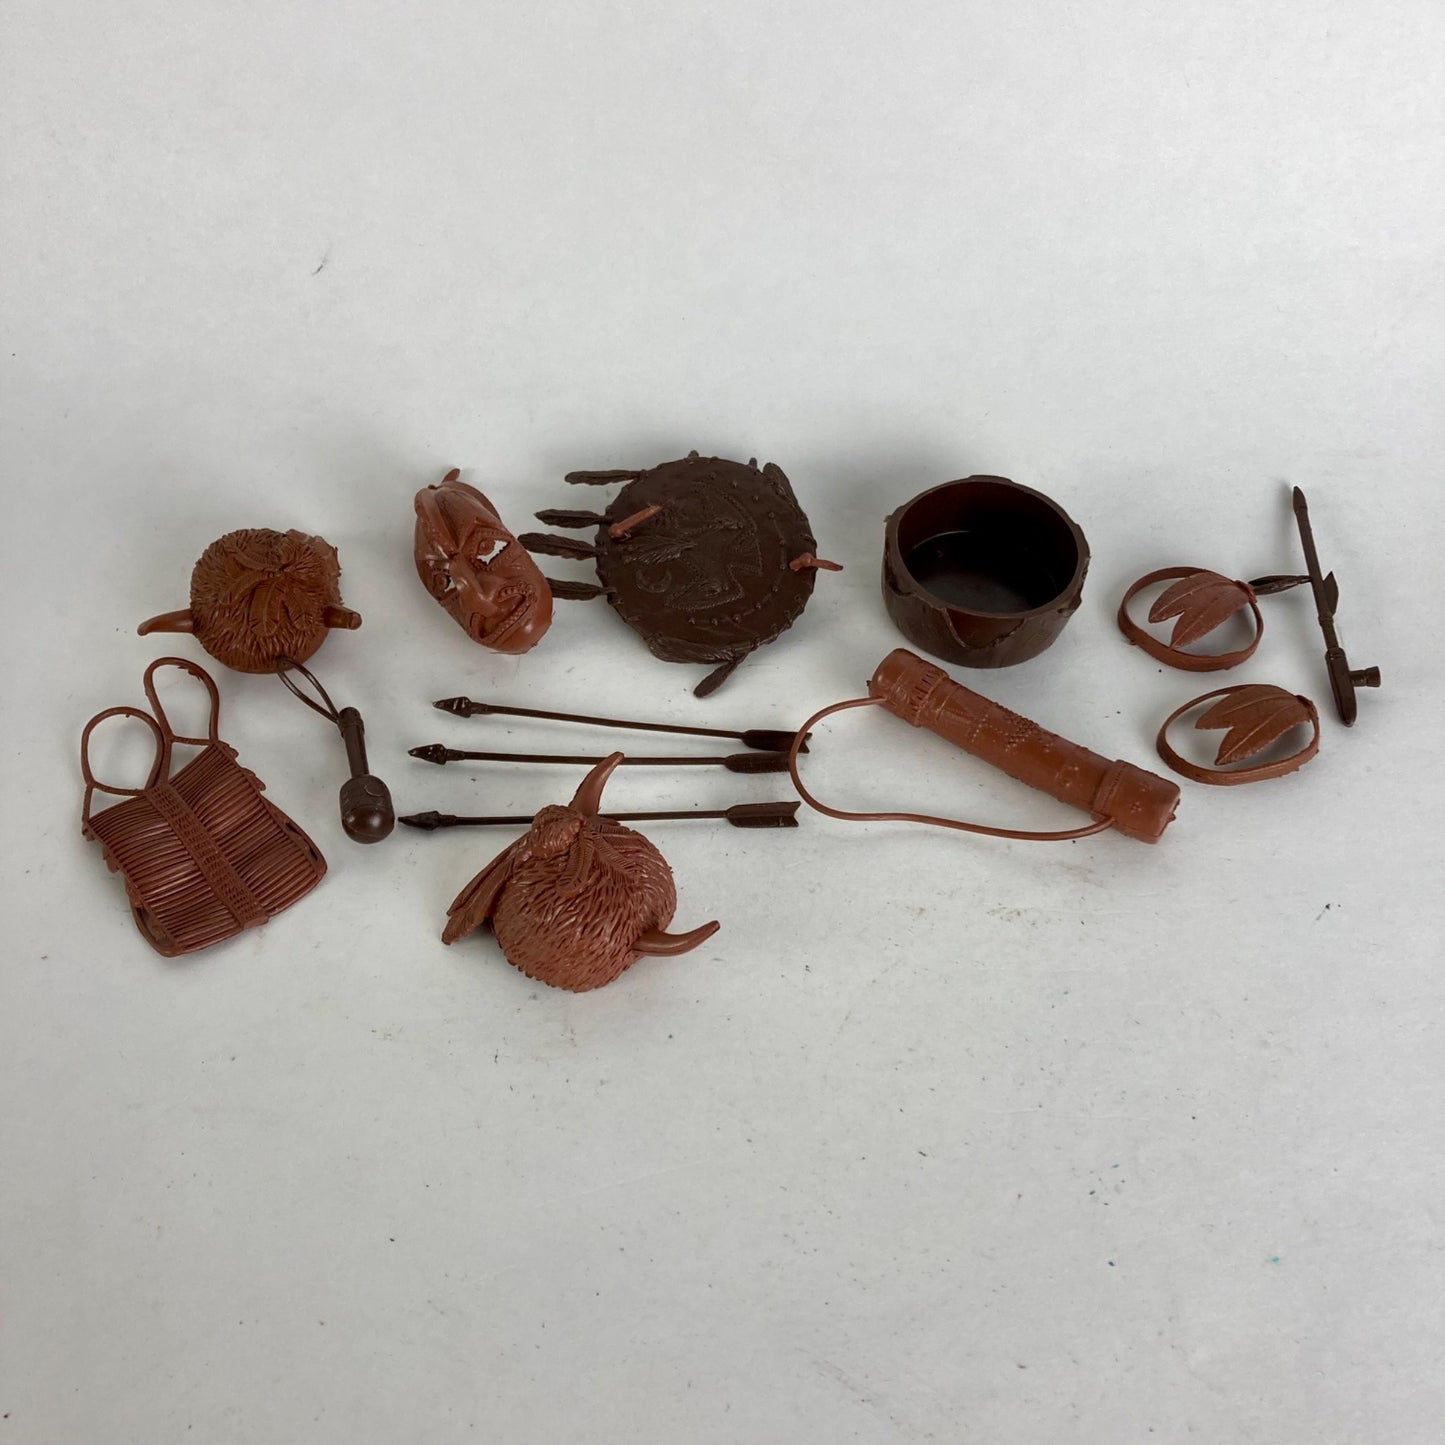 Lot Vintage Toy Indian Accessories Aztec Mayan Plastic Spears Masks Shield Etc.